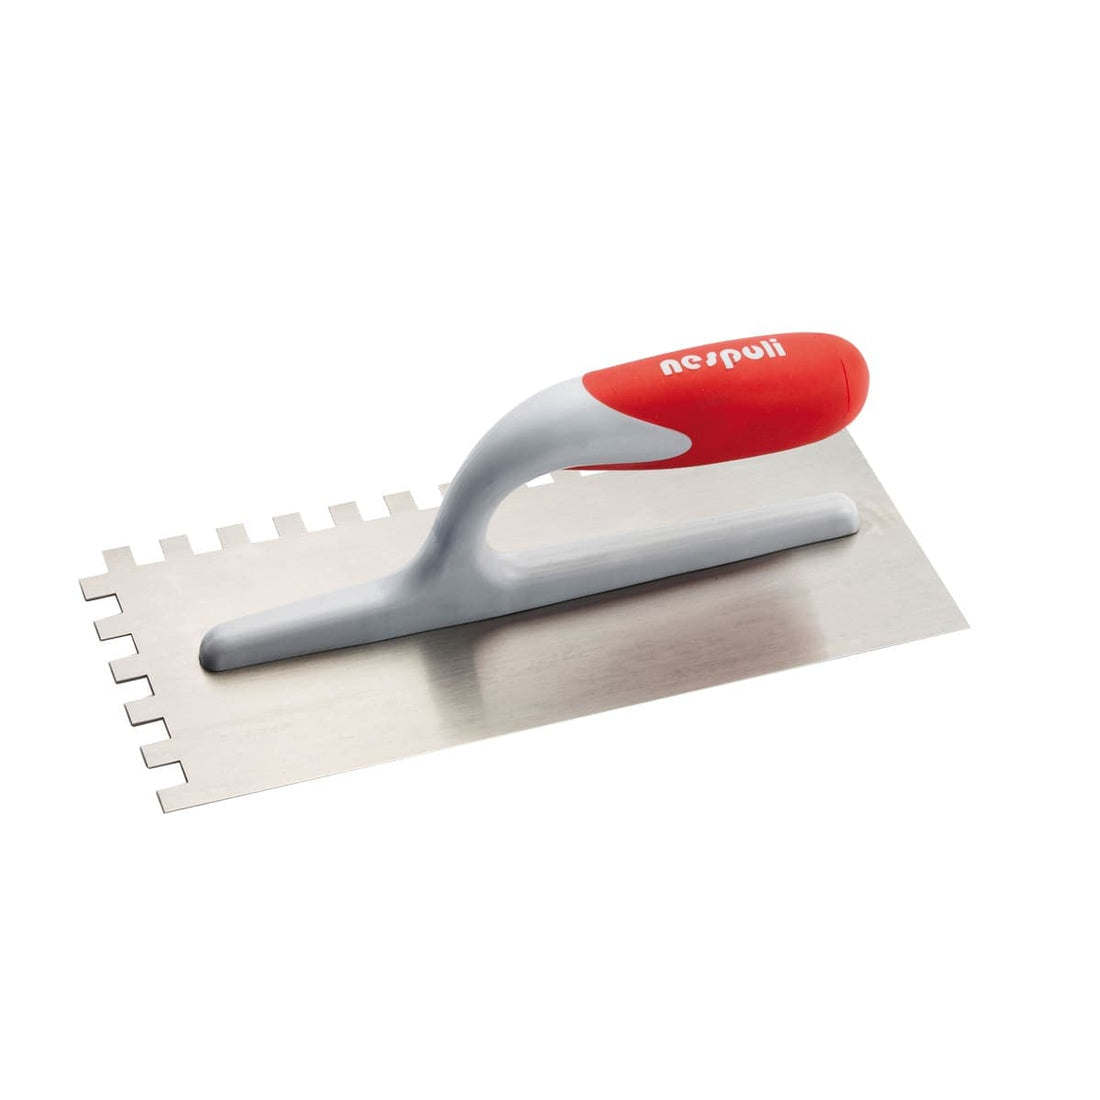 12 X 28 CM AMERICAN STEEL TOOTHED TROWEL - best price from Maltashopper.com BR400900083